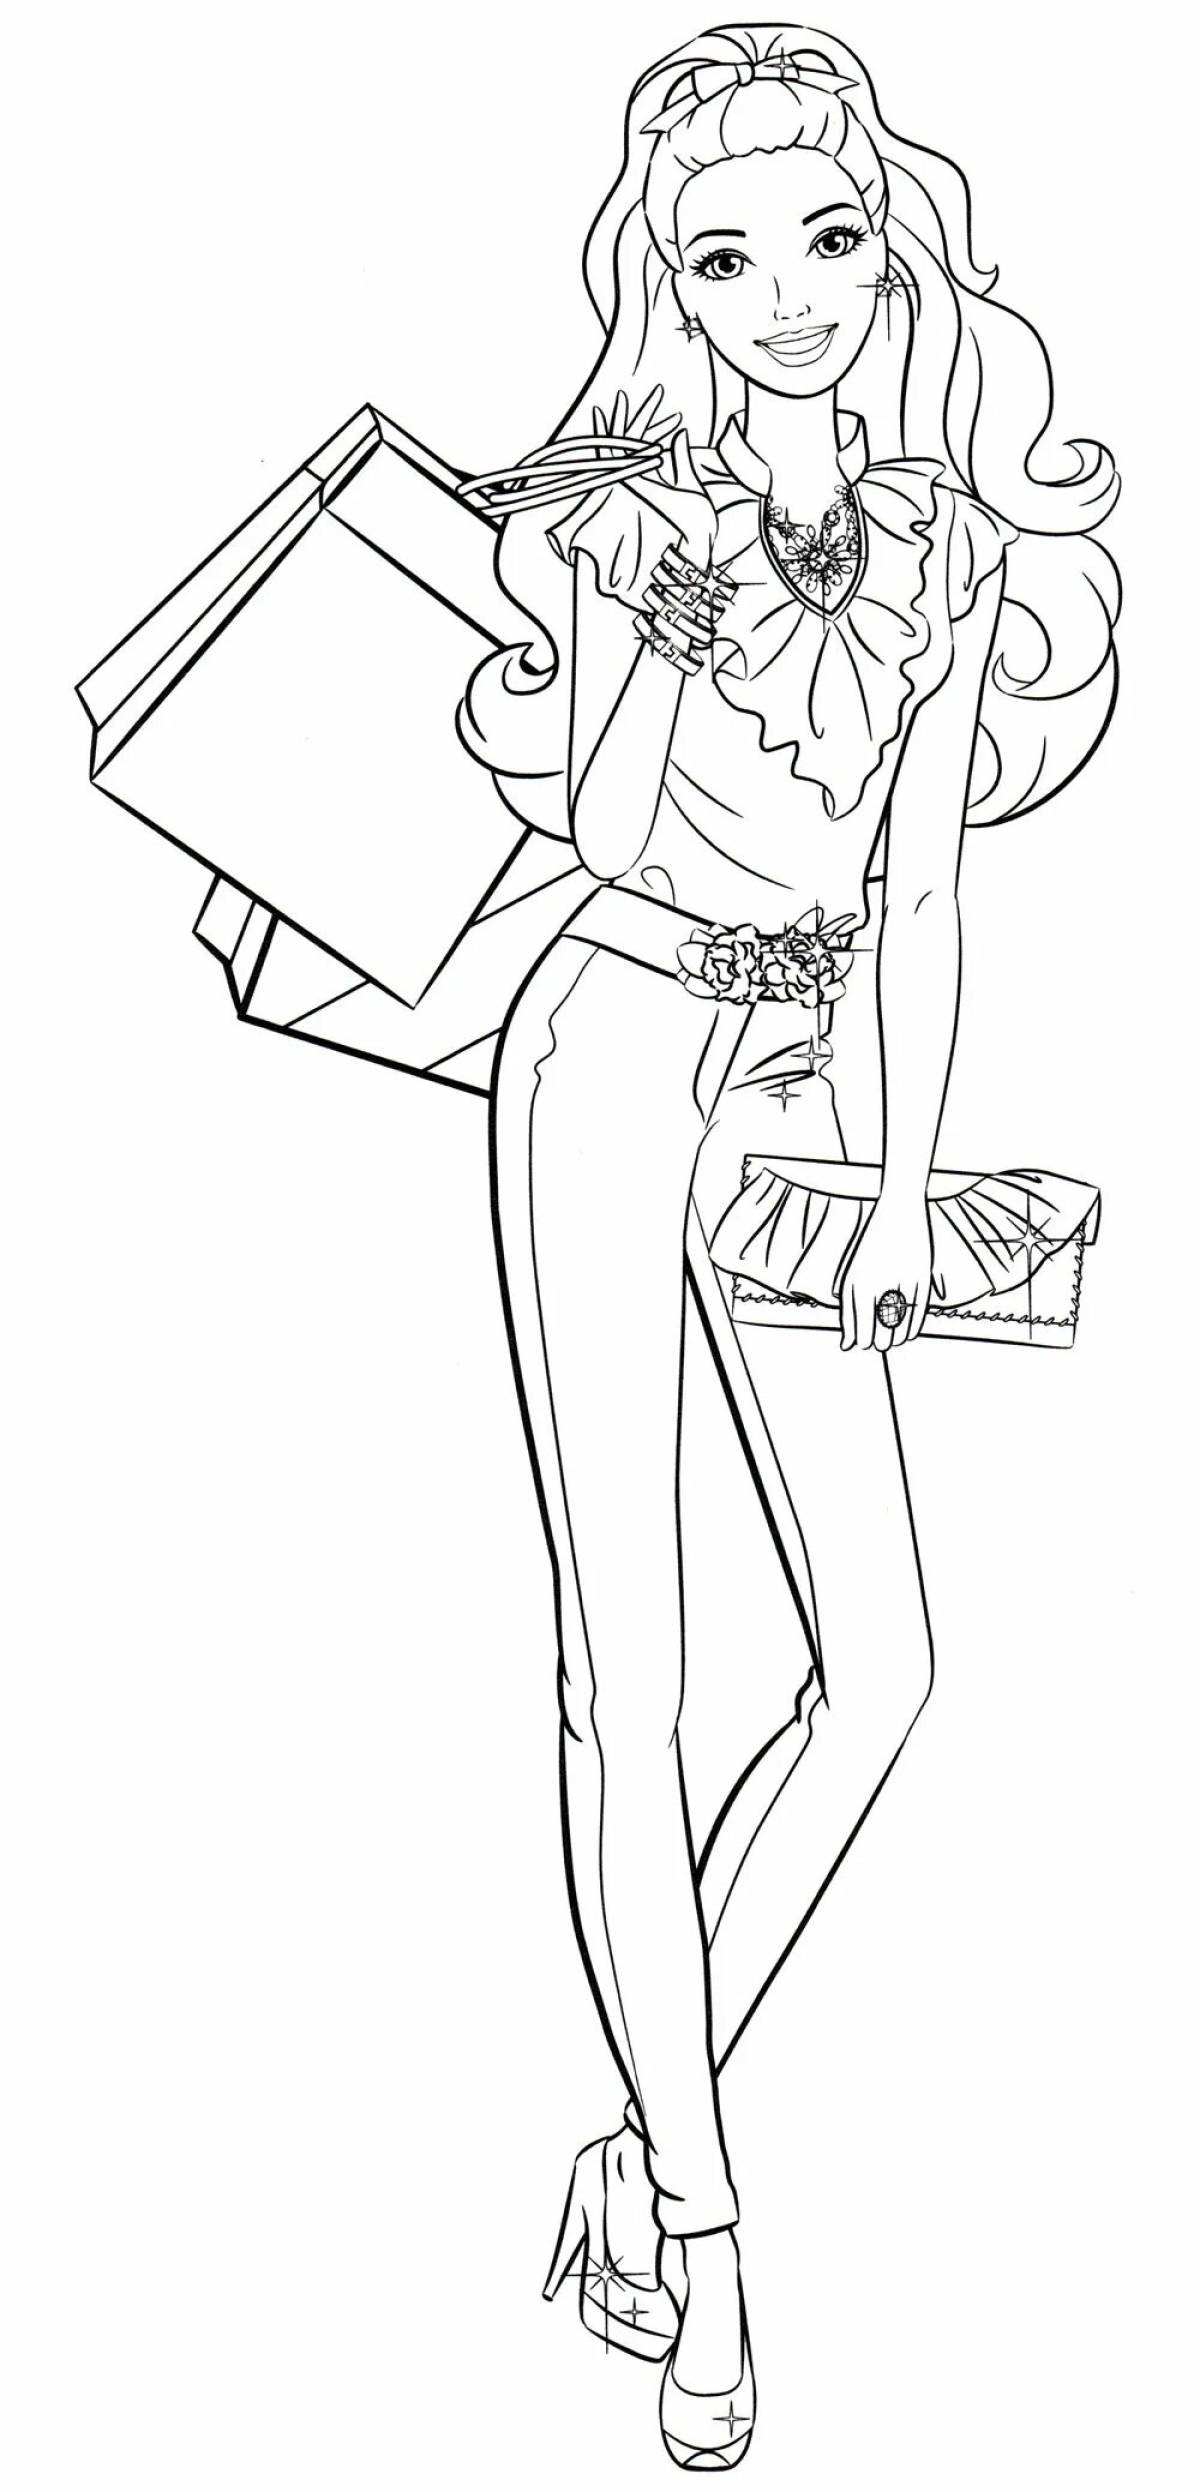 Animated barbie card coloring page